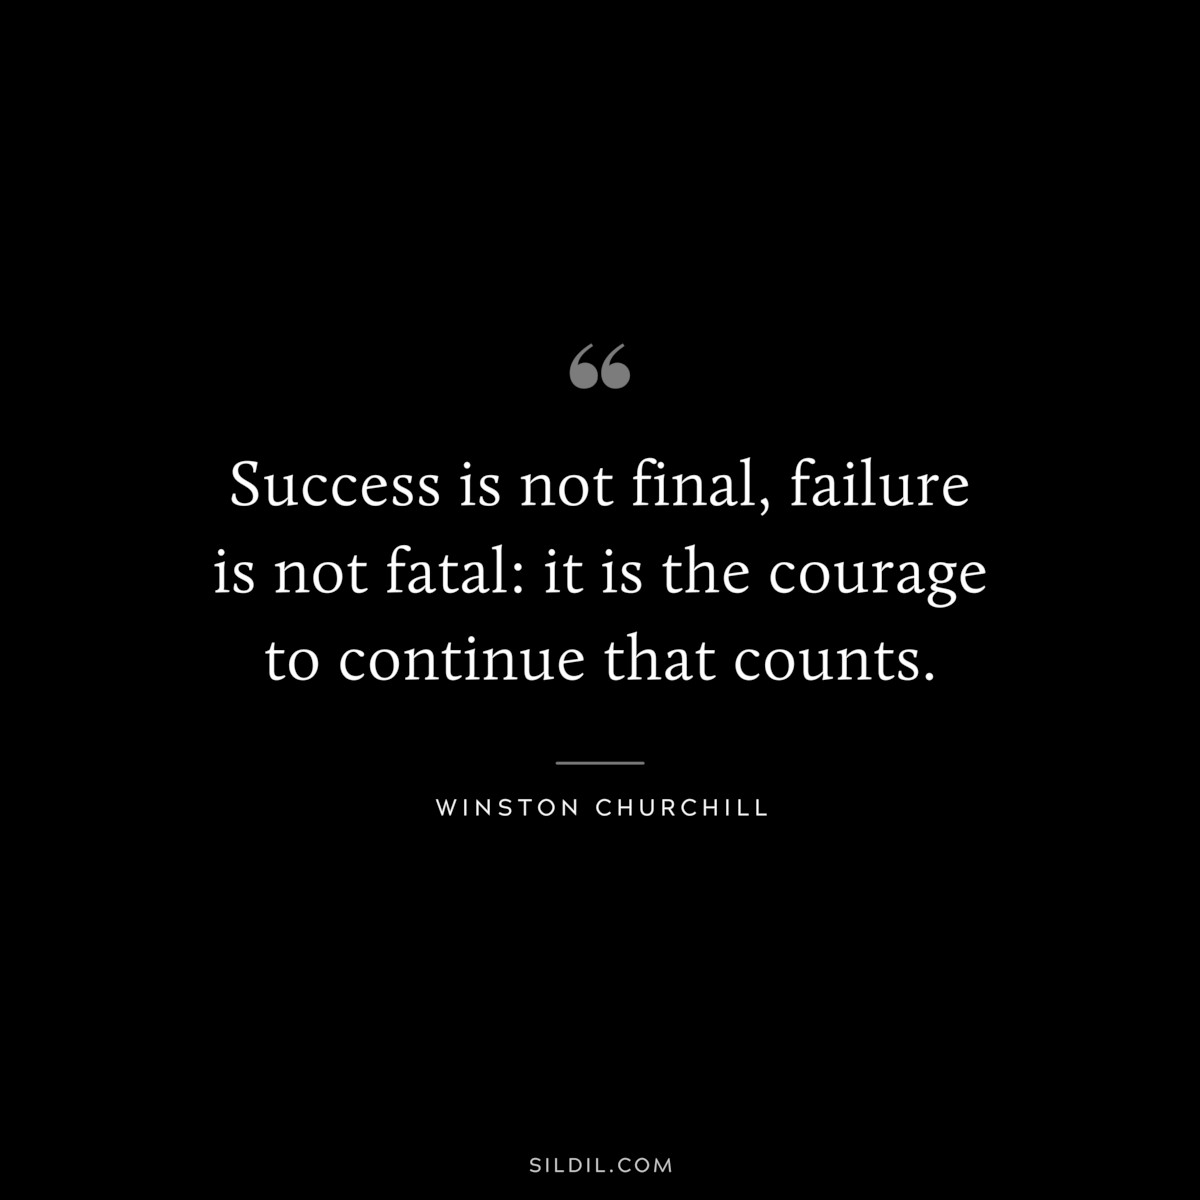 Success is not final, failure is not fatal: it is the courage to continue that counts. ― Winston Churchill